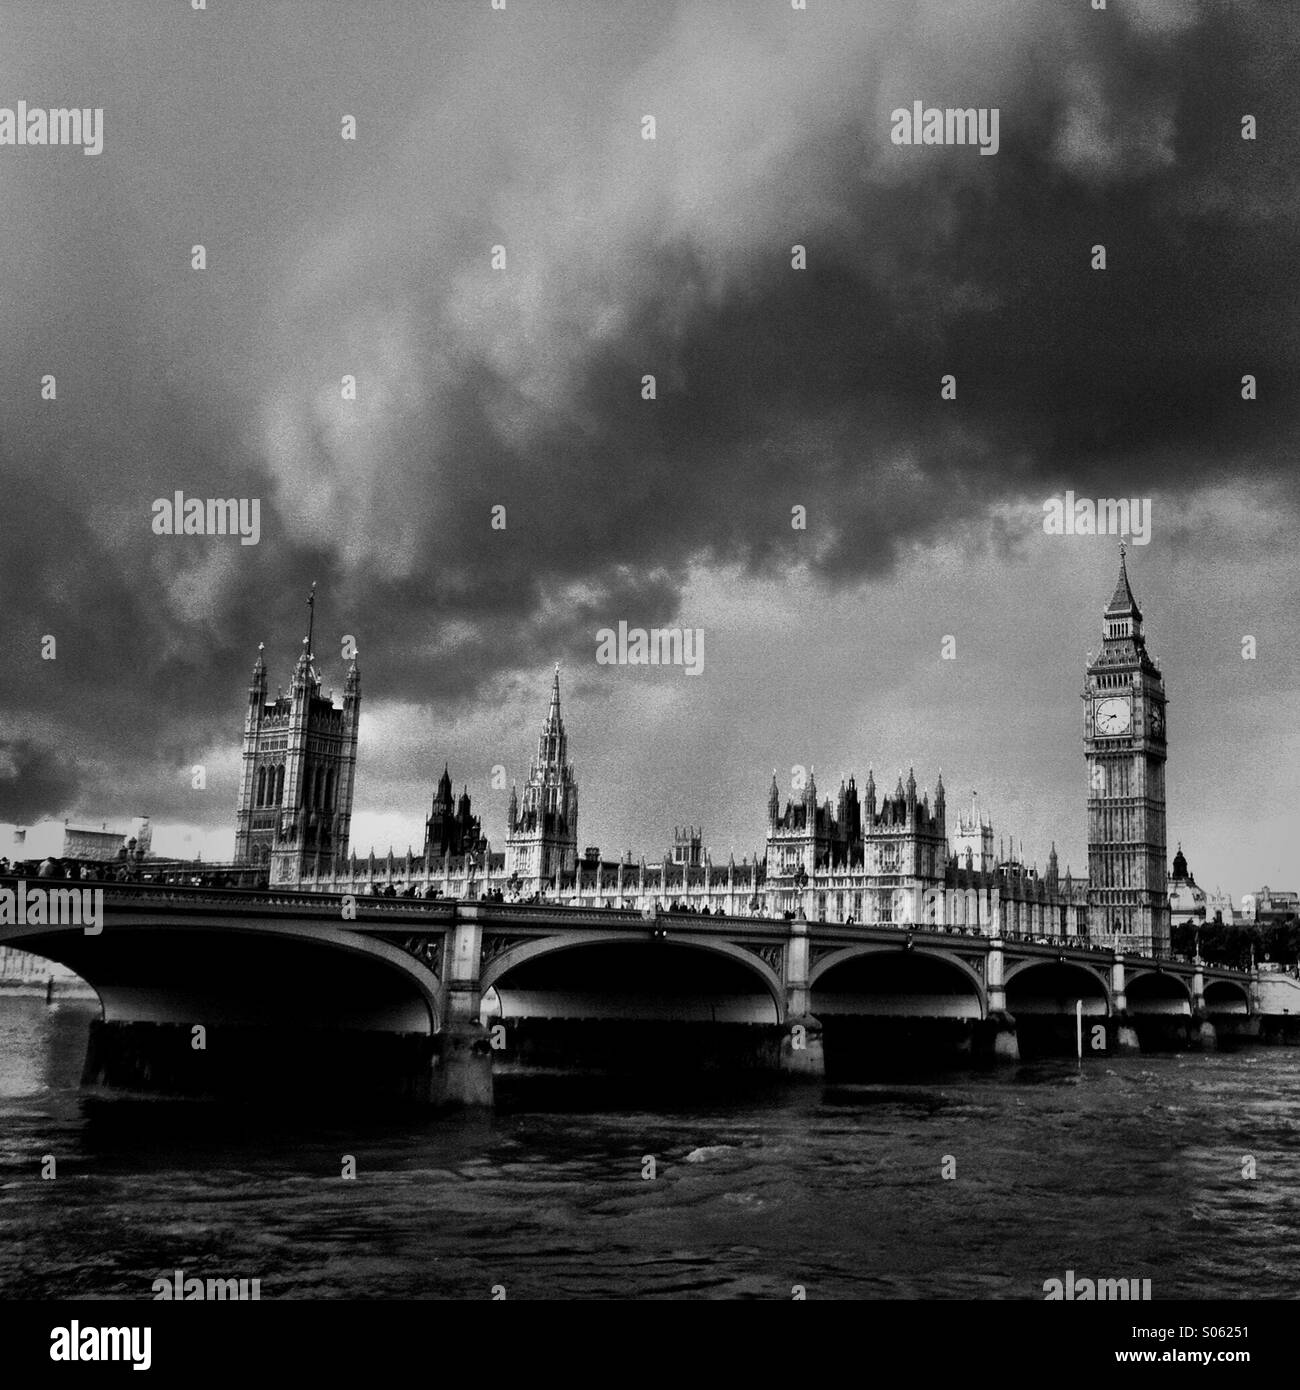 Dark heavy storm clouds over Big Ben and parliament.  London, England UK Stock Photo